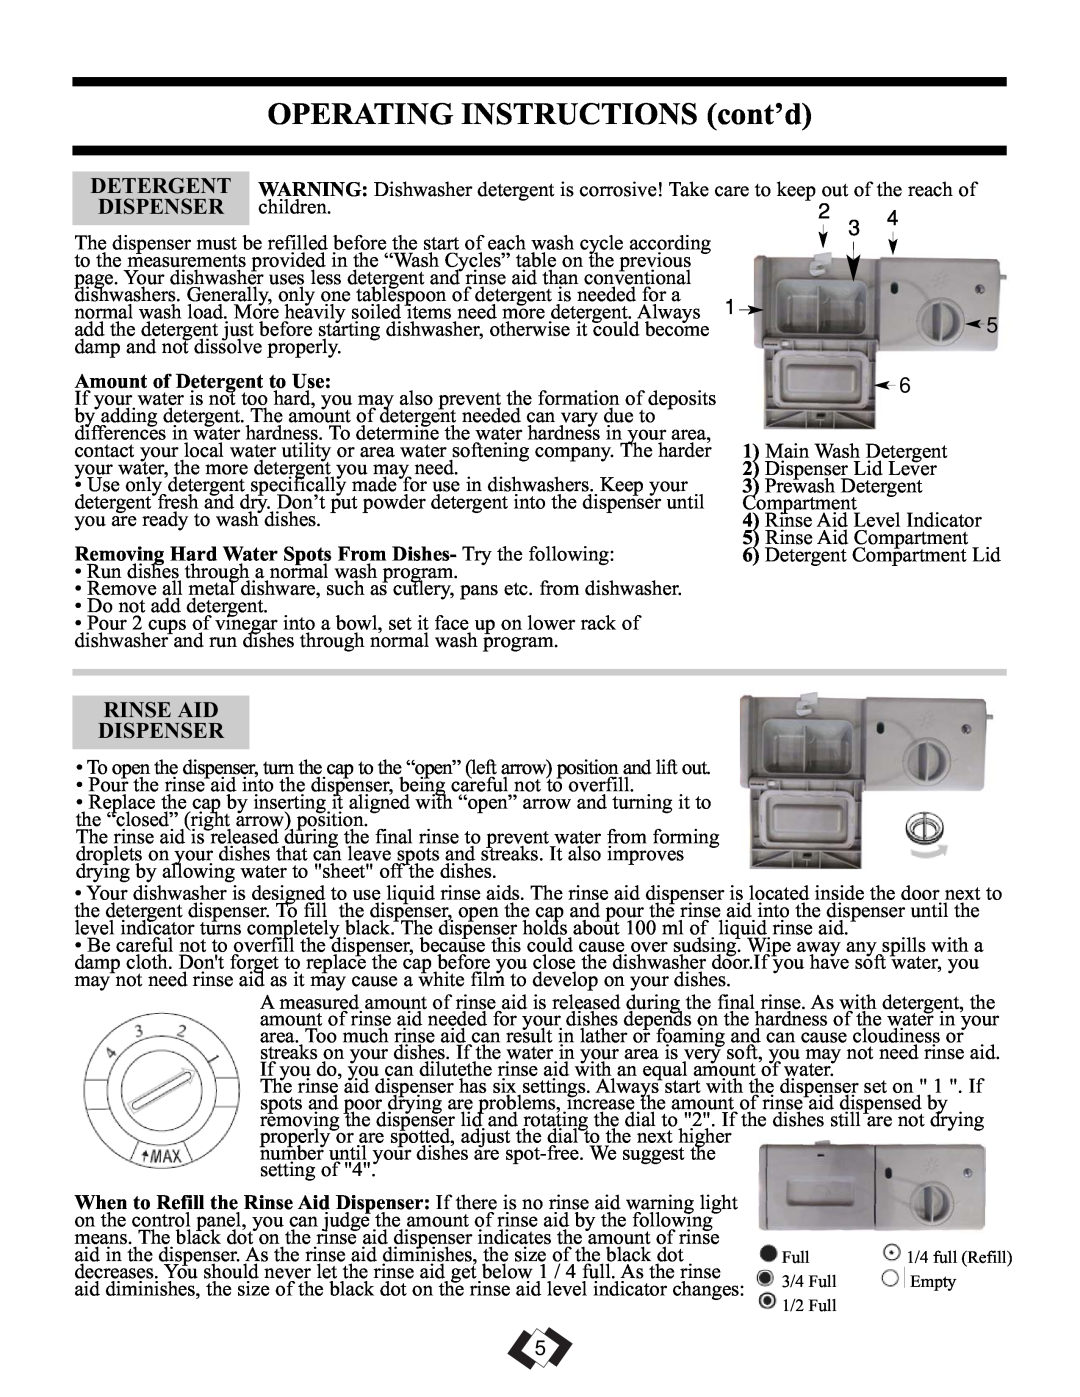 Danby DDW1899WP-1 OPERATING INSTRUCTIONS cont’d, Rinse Aid Dispenser, Amount of Detergent to Use 